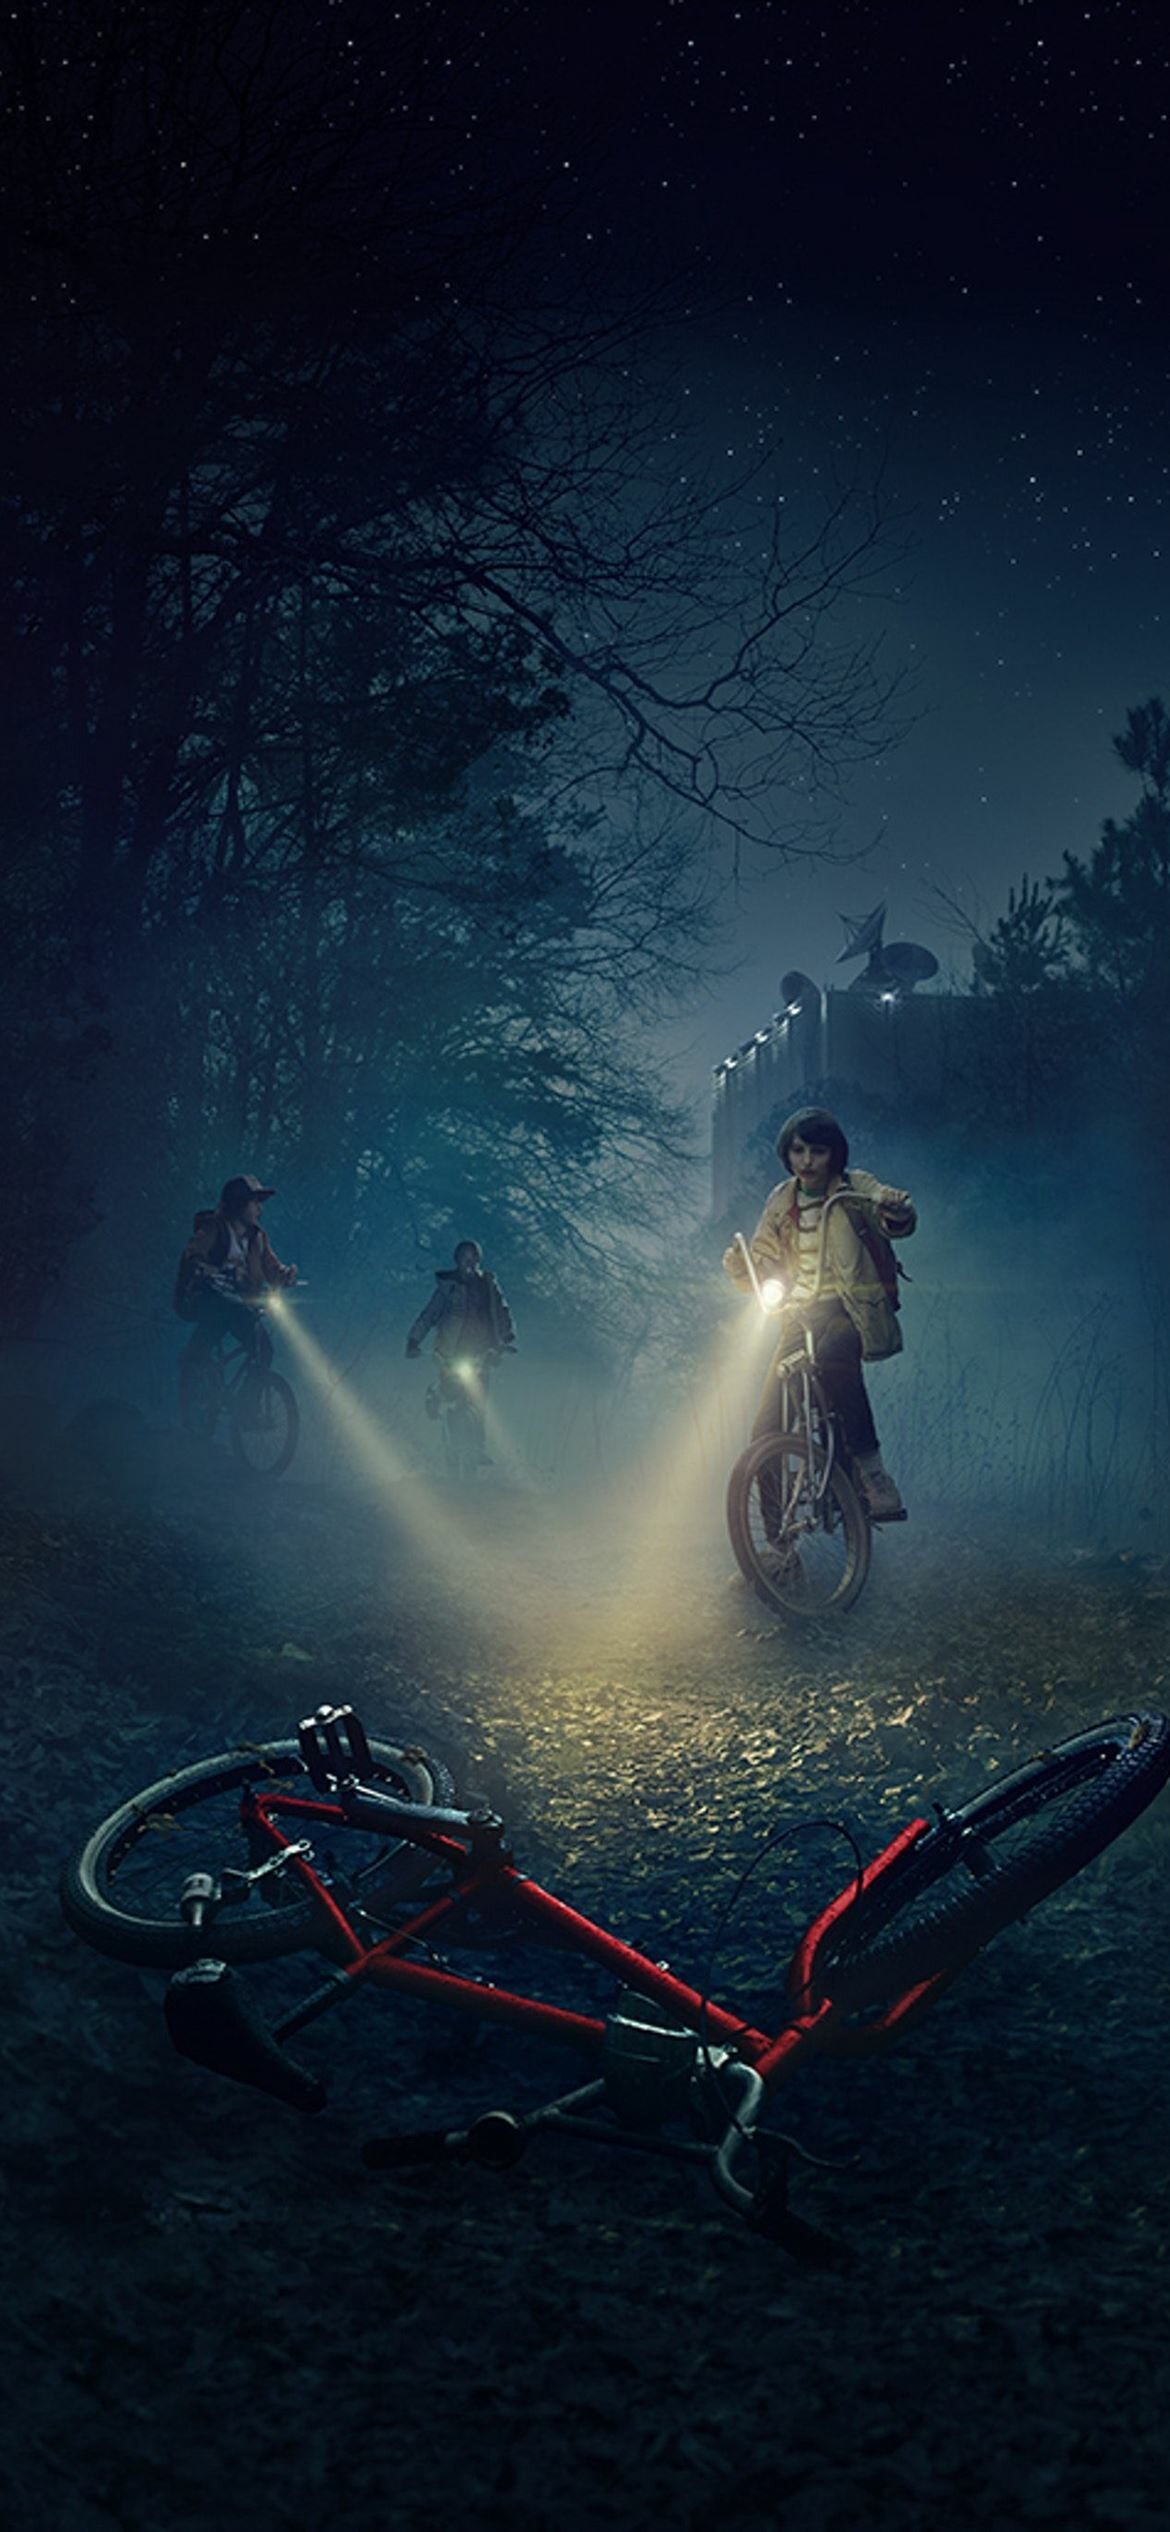 Stranger Things: The series has been nominated for 51 Primetime Emmy Awards, with 12 wins. 1170x2540 HD Wallpaper.